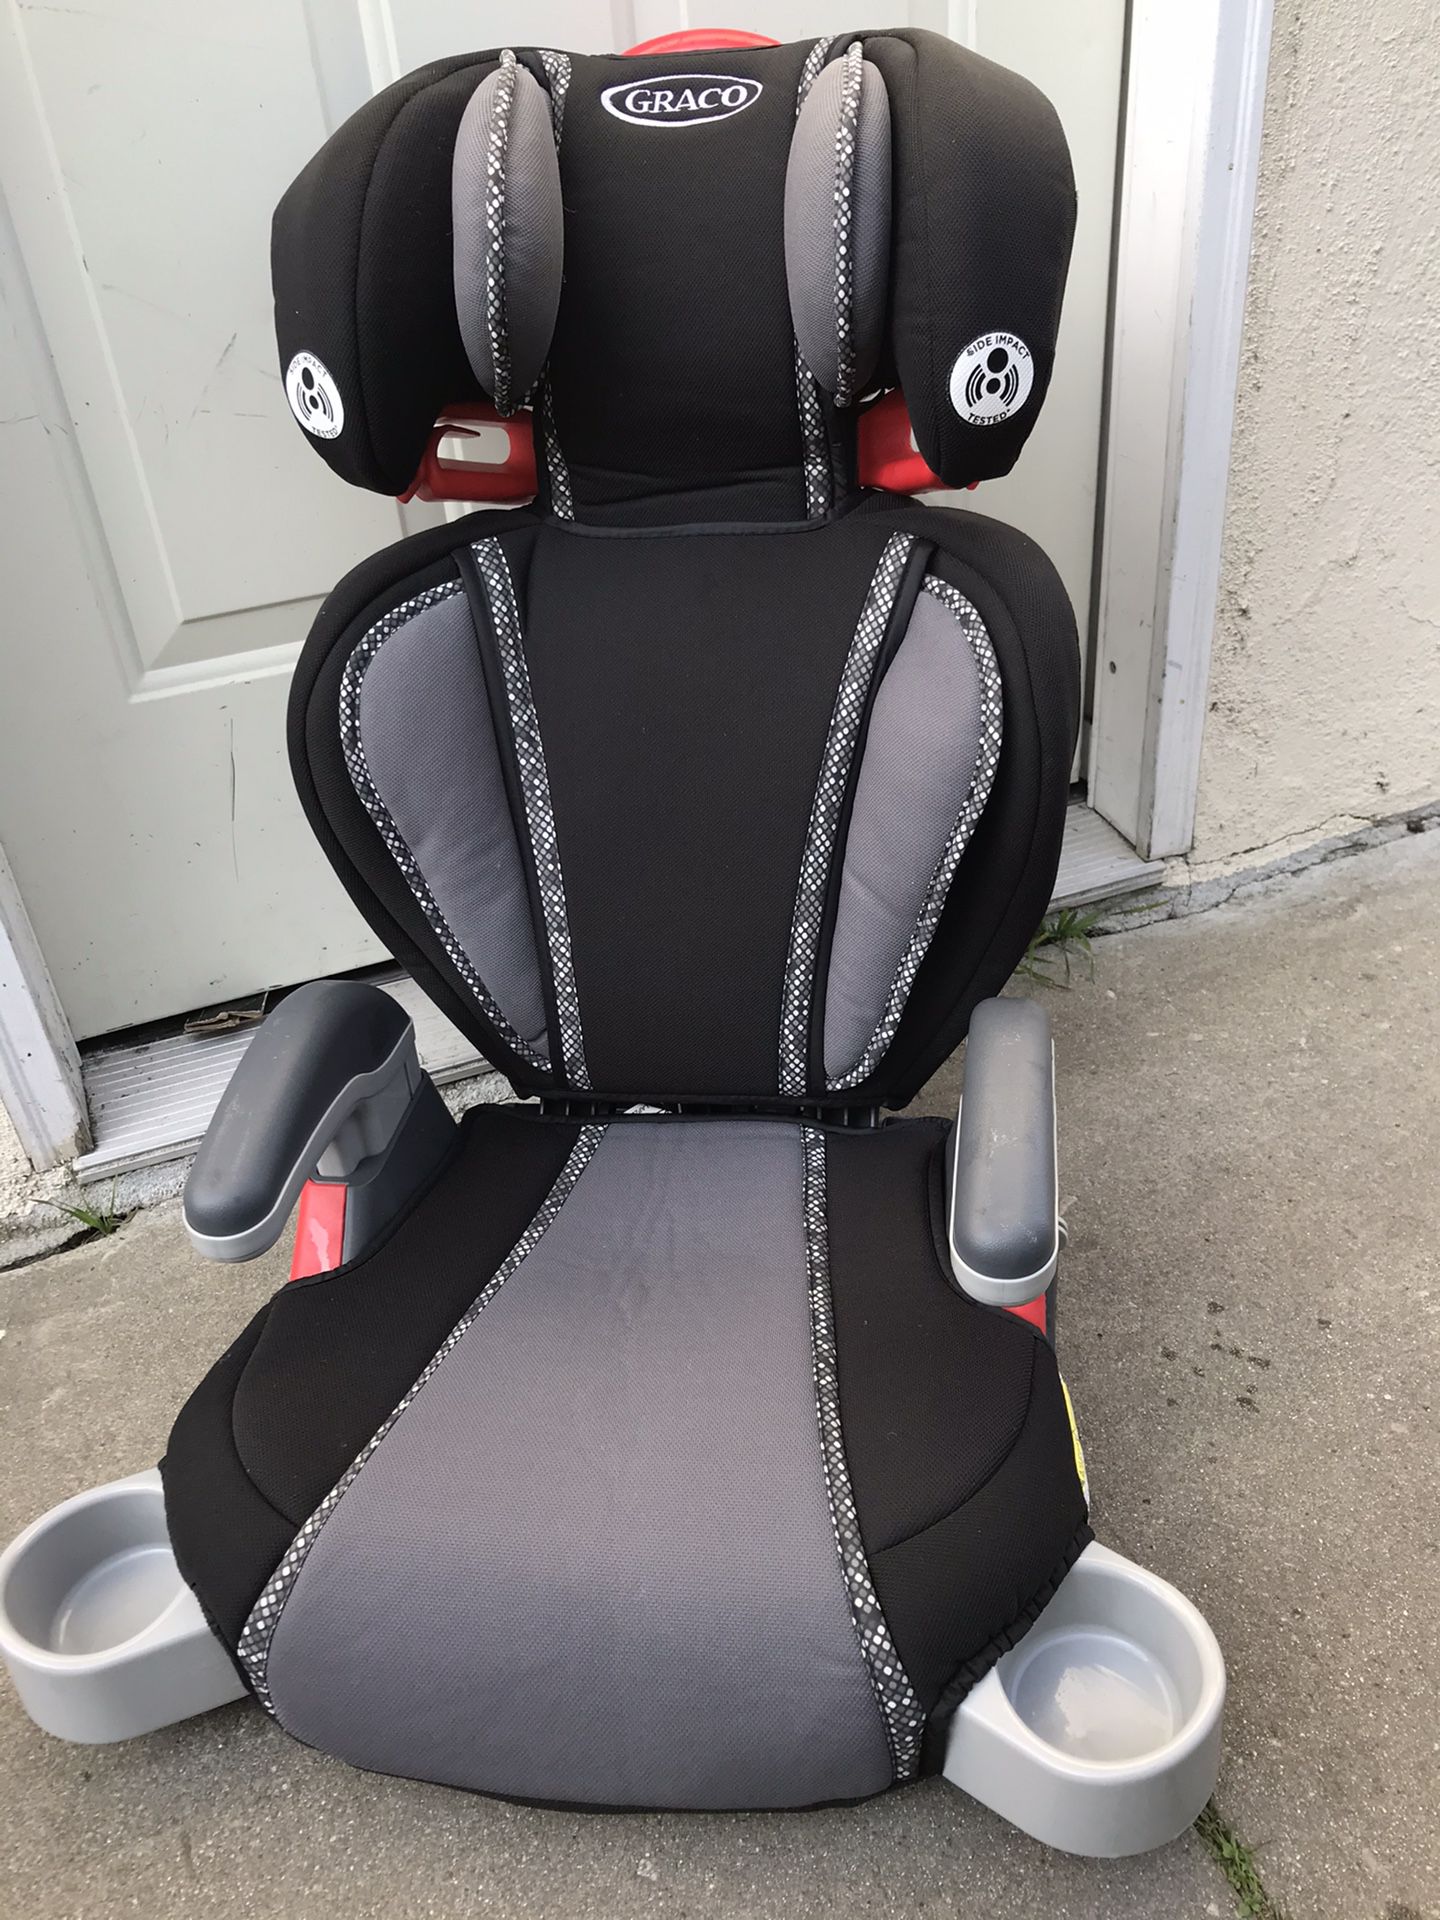 GRACO BOOSTER SEAT